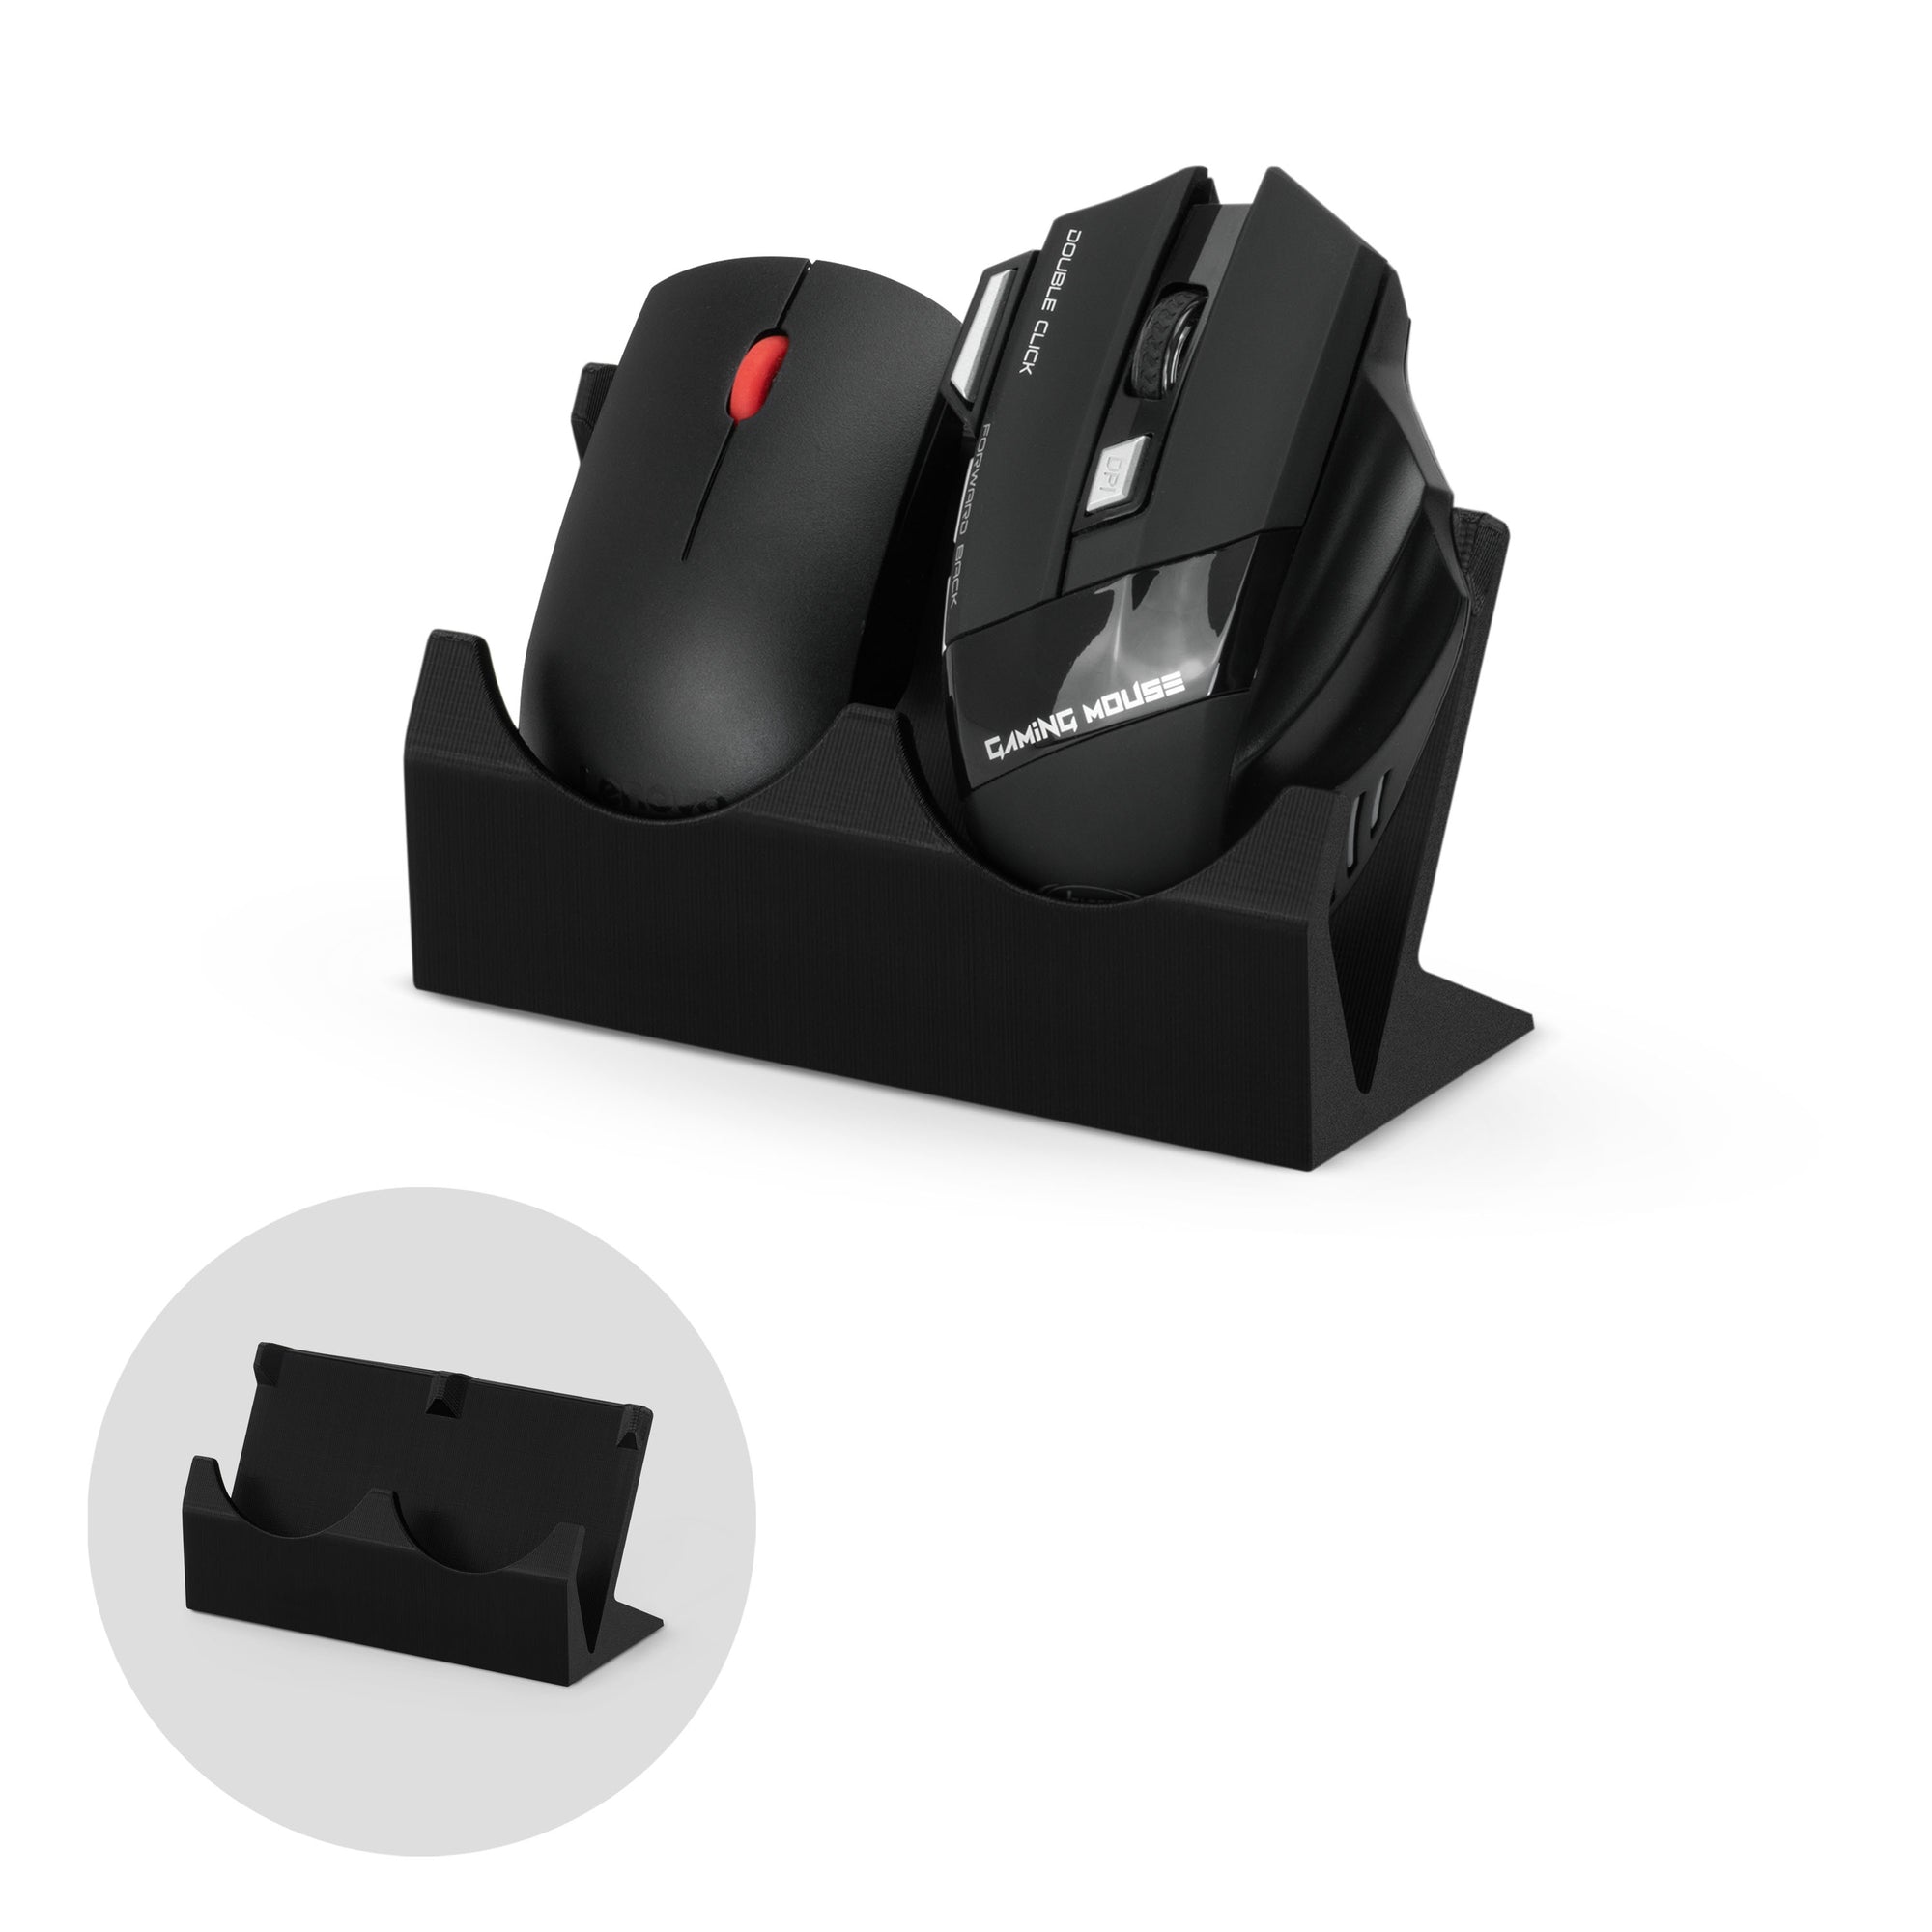 Desktop Dual PC Mouse Stand Holder, Suitable for Small Or Large Gaming & Office Mice From Logitech, Razer, Corsair & More